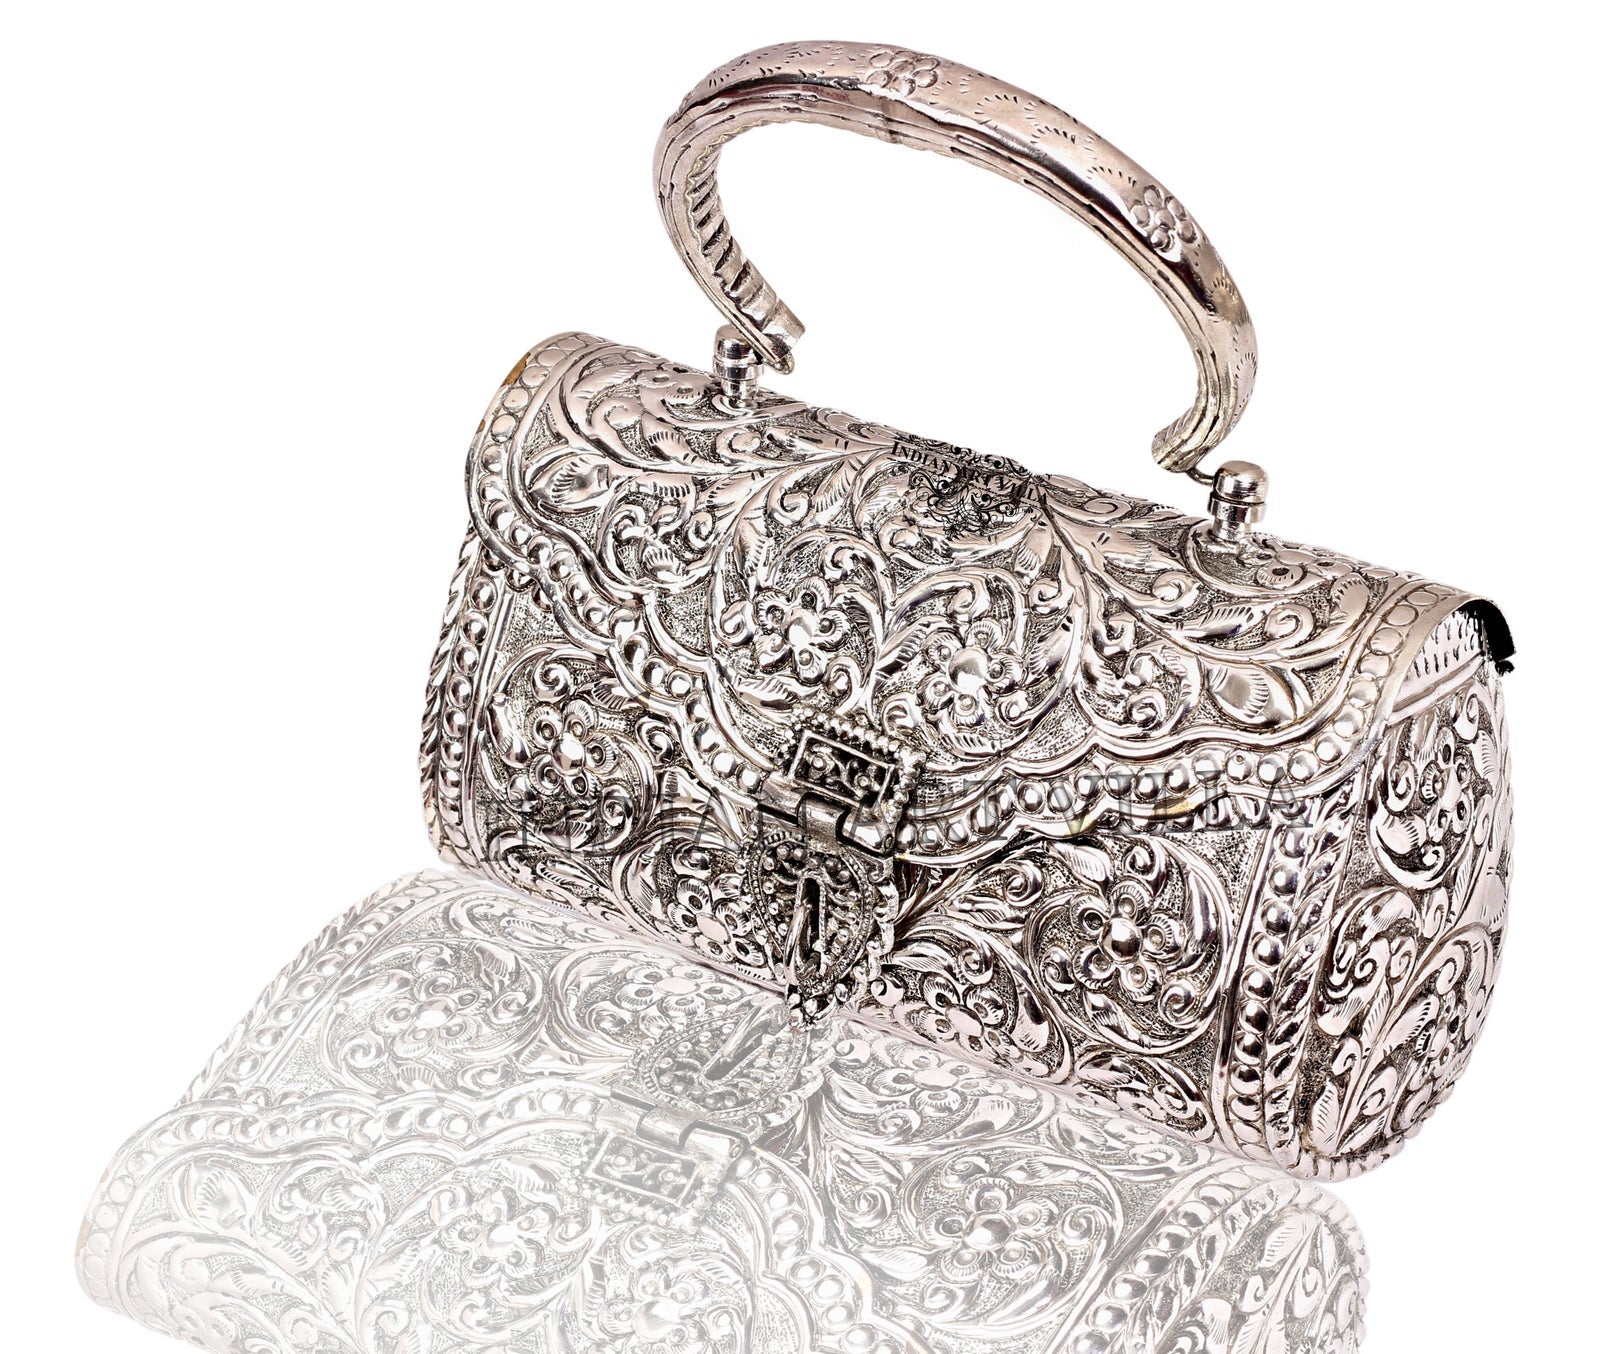 Diamond Sequin Clutch Purse and Handbag Two Chain Shoulder Bag – TulleLux  Bridal Crowns & Accessories